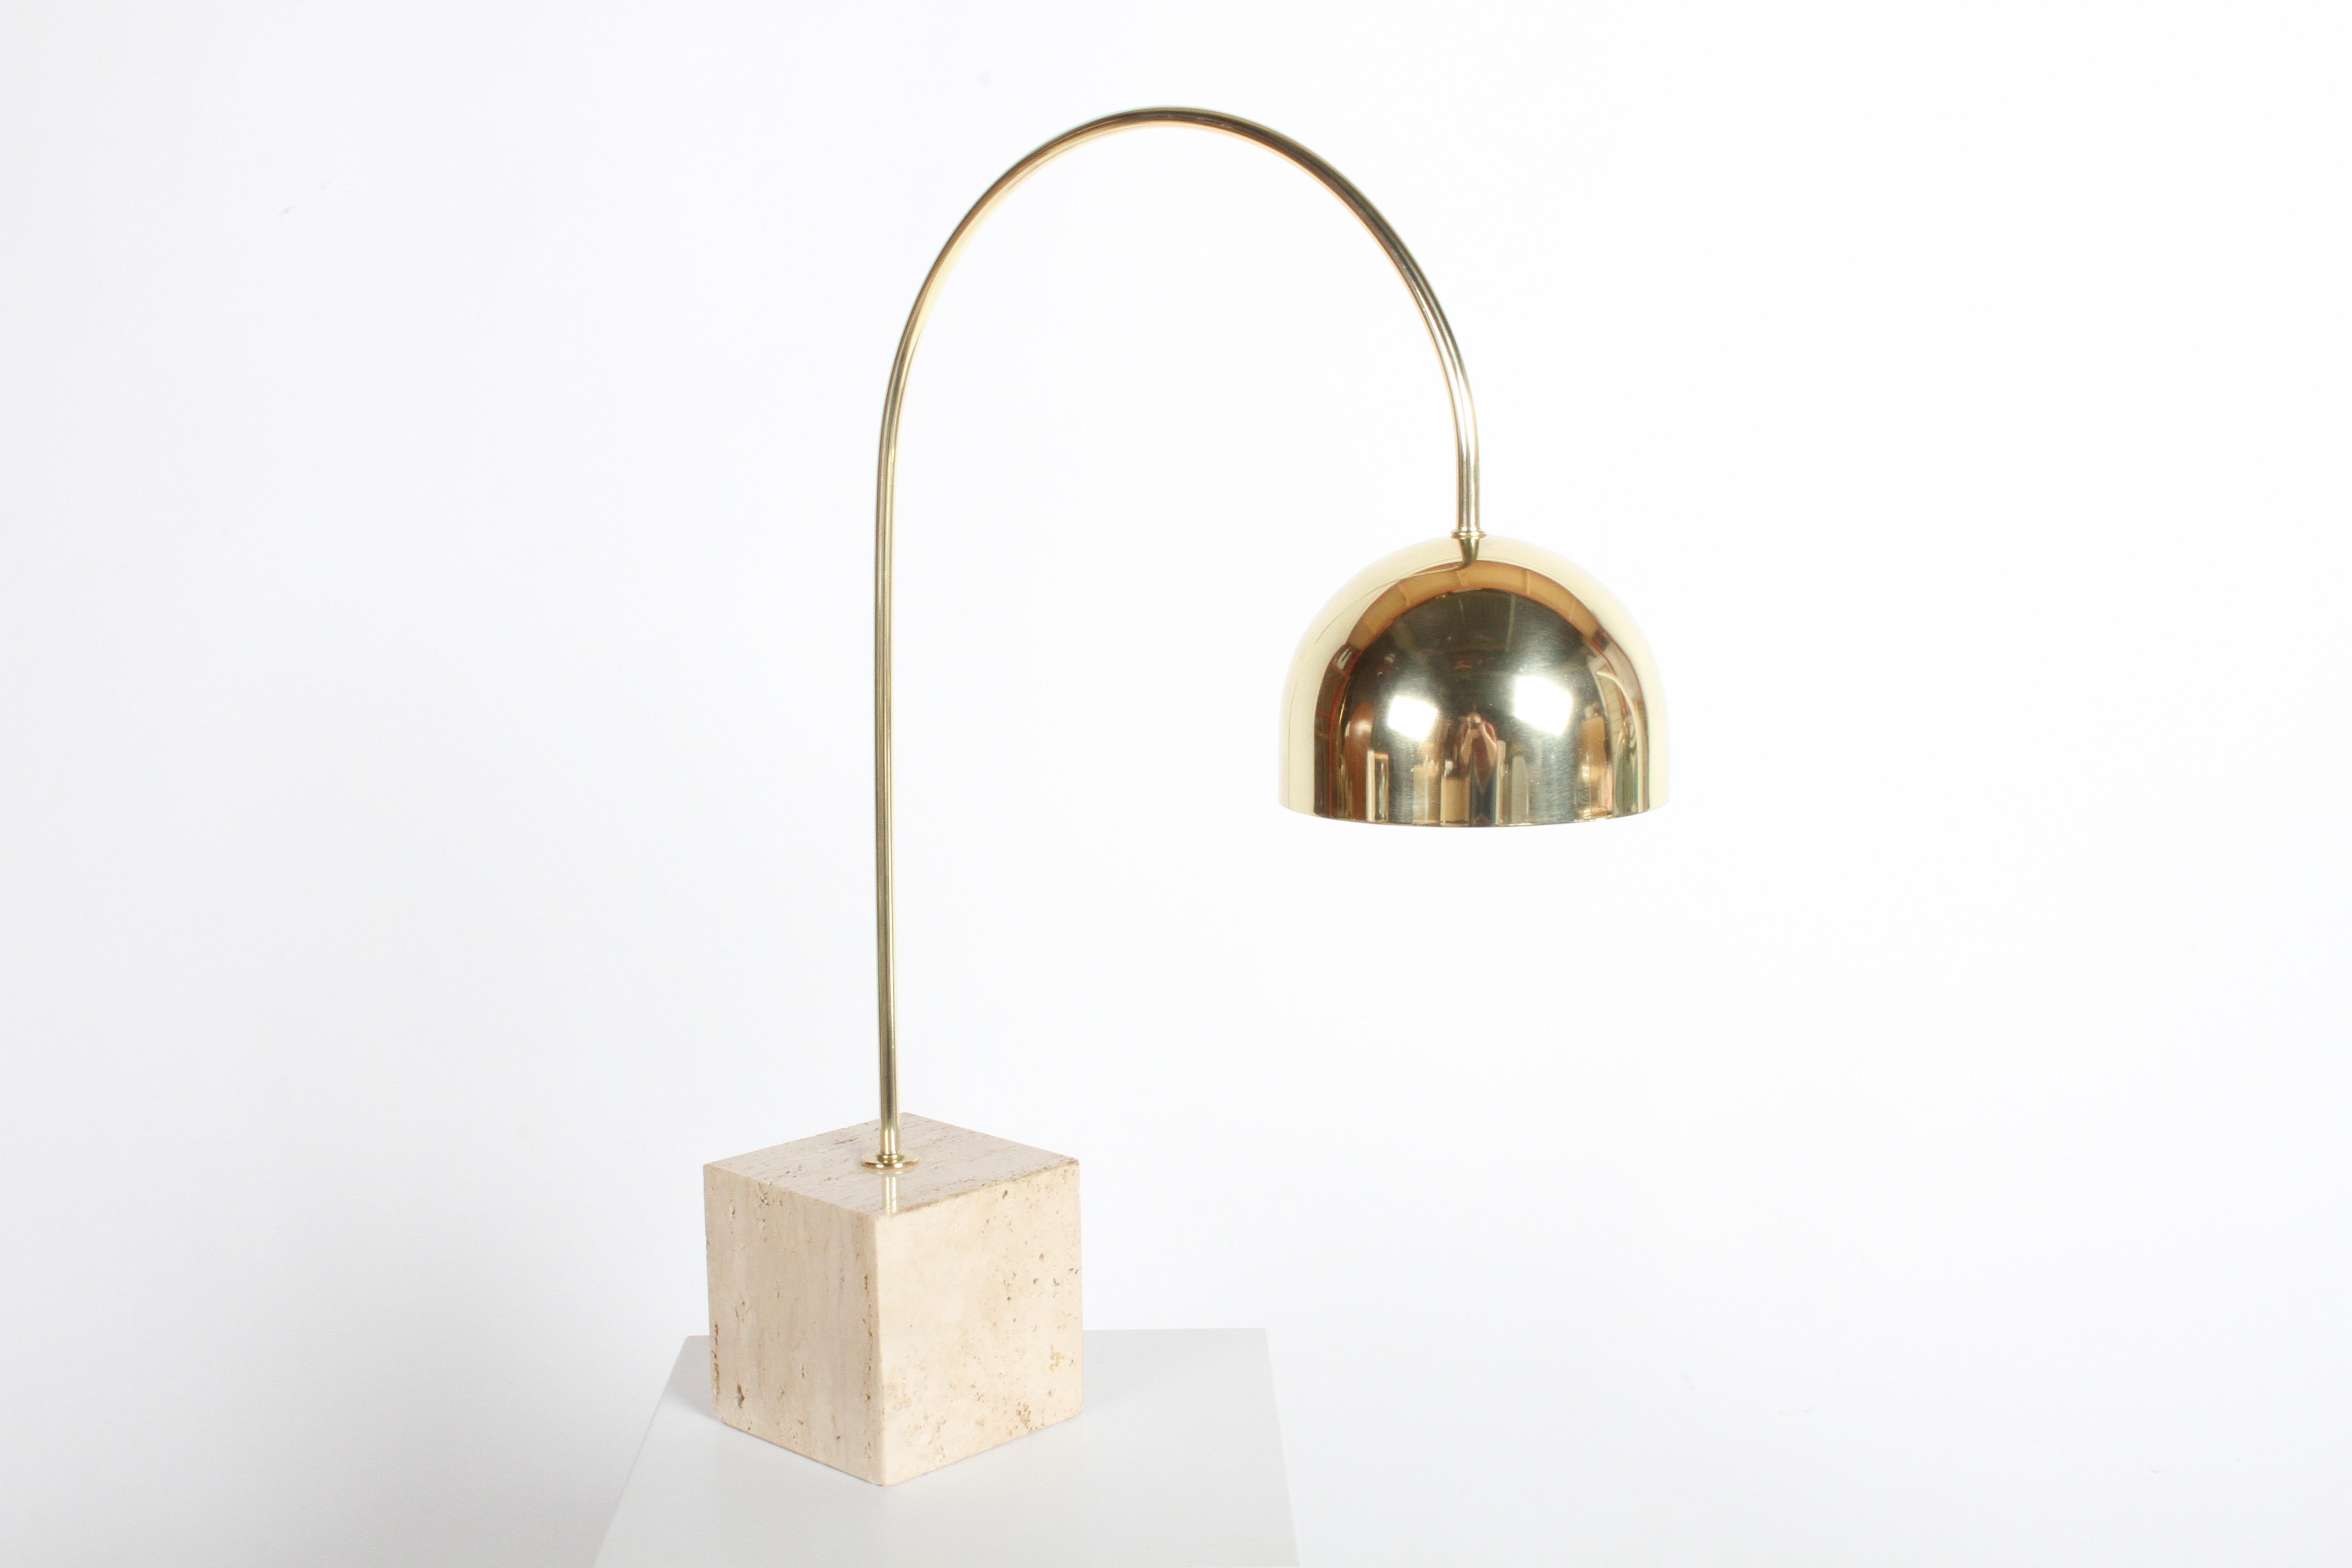 Beautiful Harvey Guzzini brass arc table lamp on travertine base. Brass arm and shade have been polished to a warm butler finish and lacquered. Inside the shade has new white paint. Has been rewired with new clear cord that has inline on/off switch.